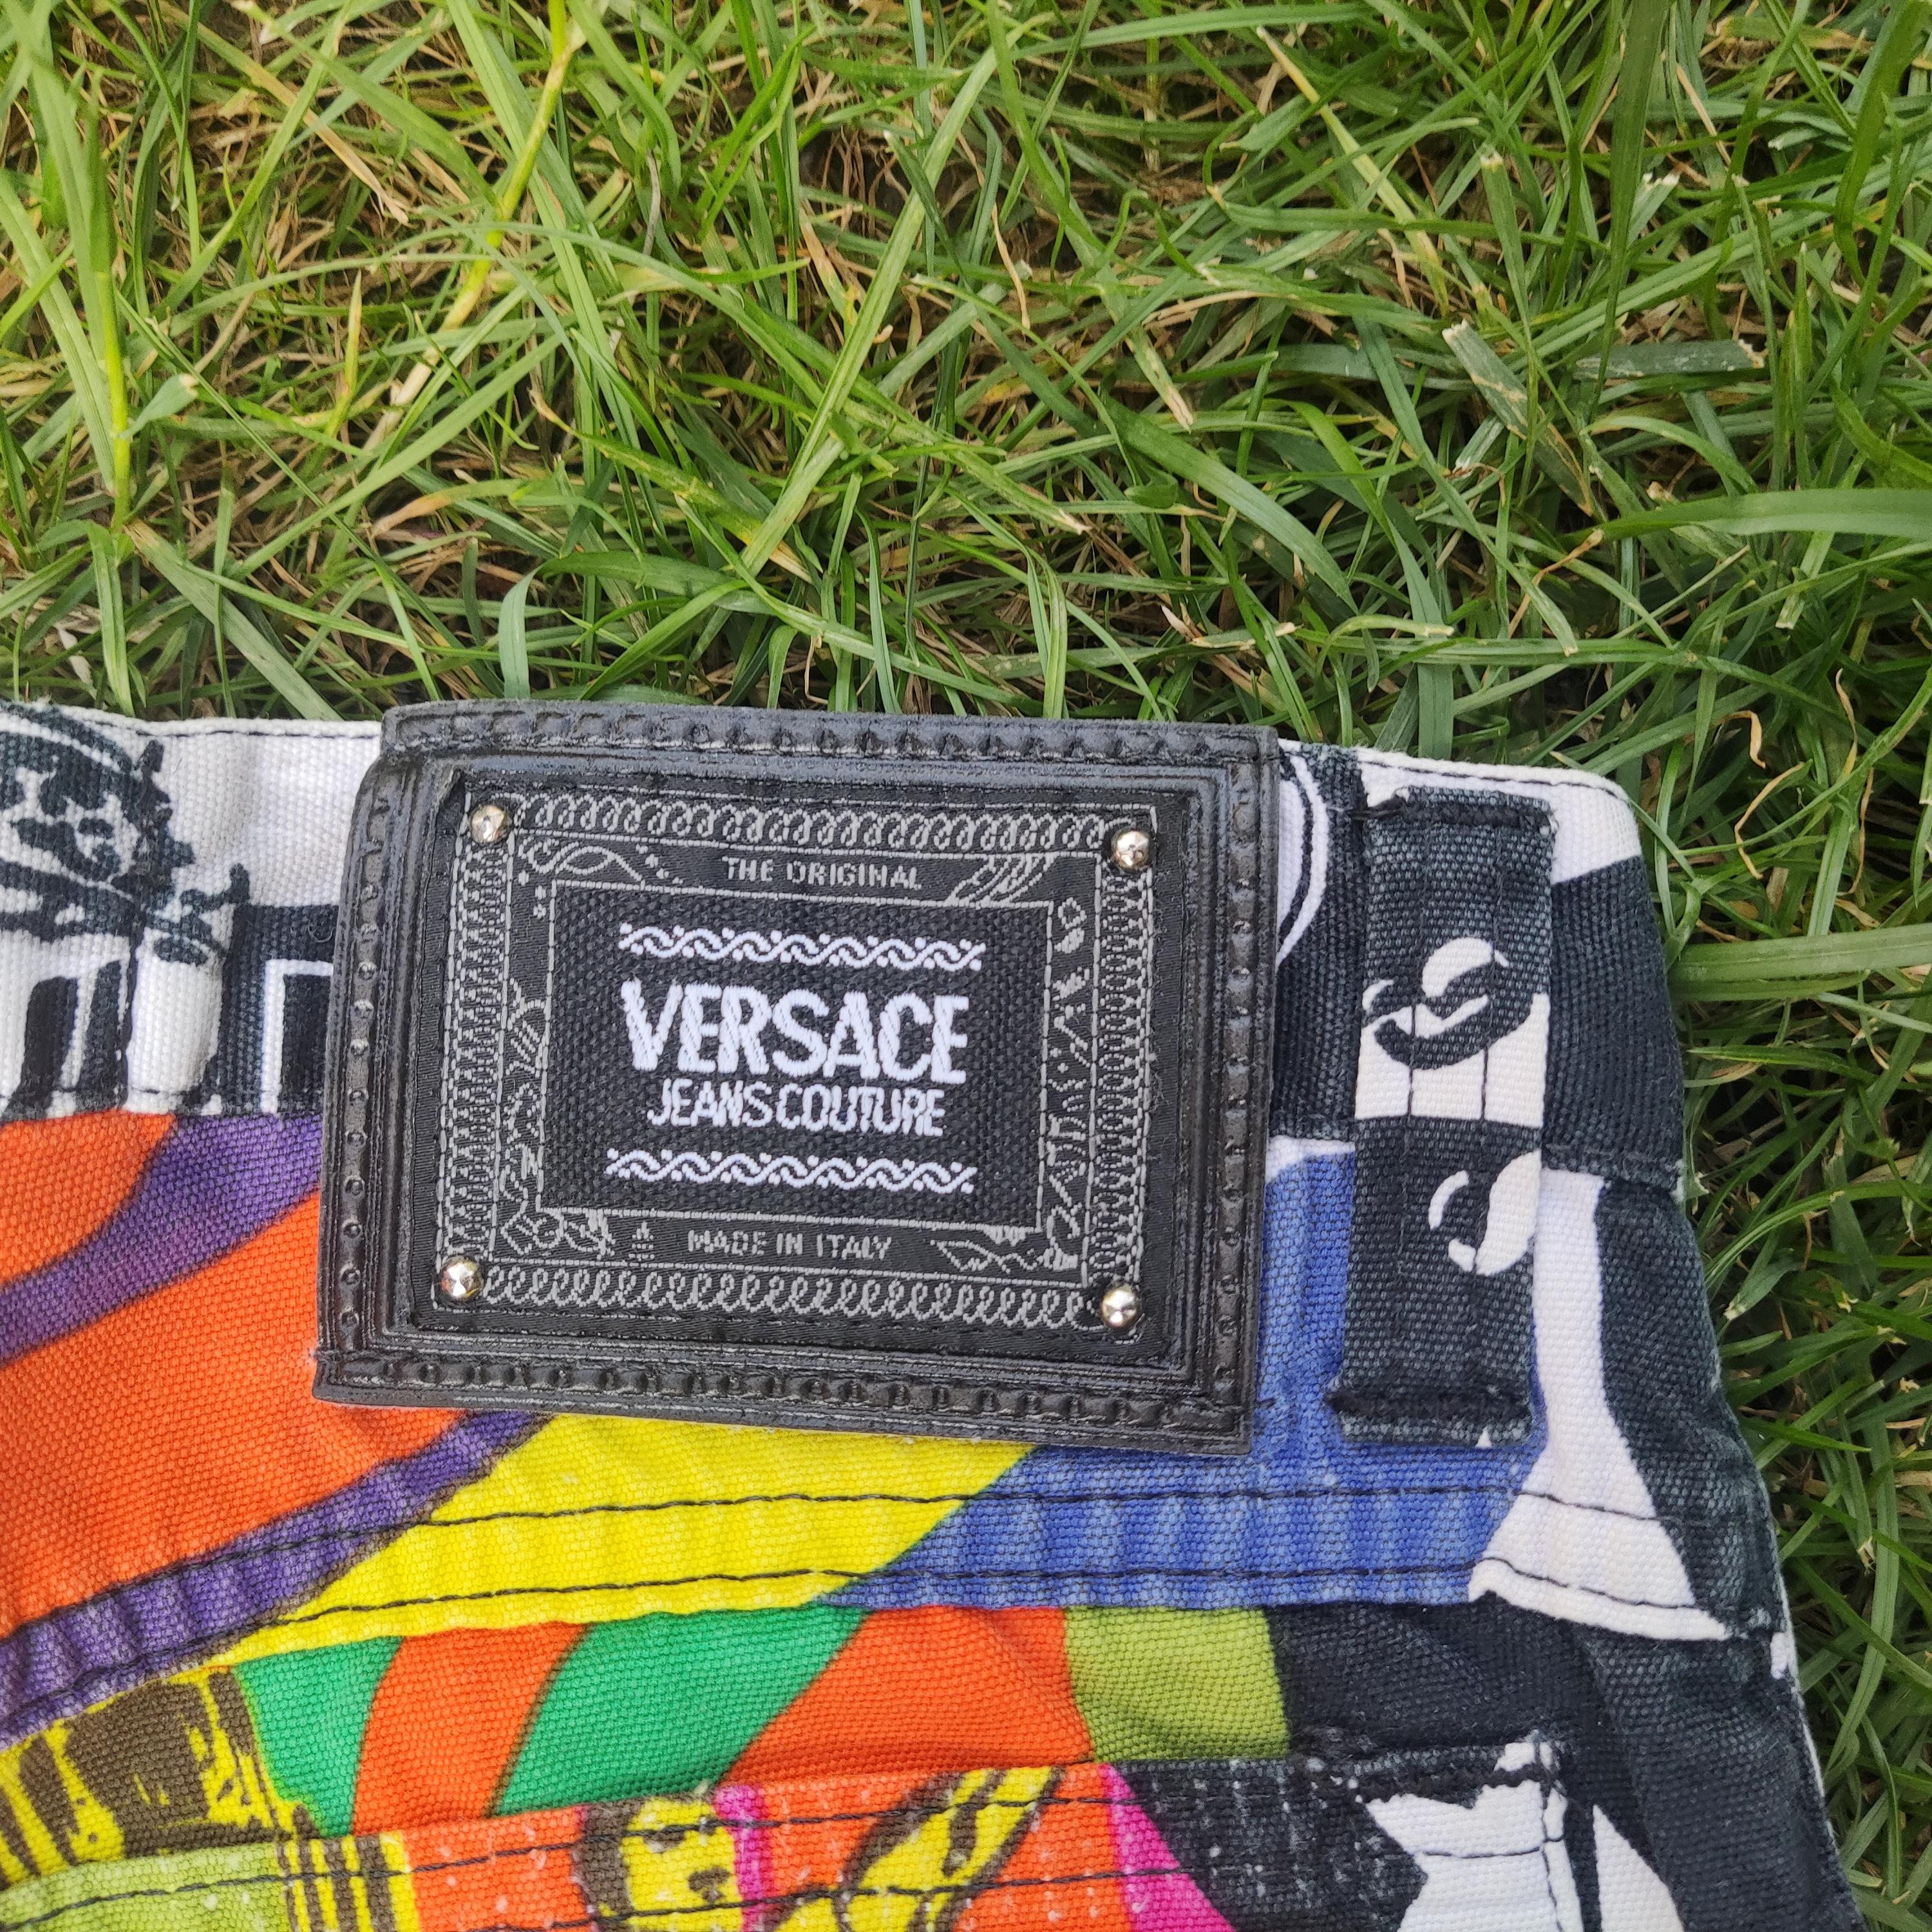 Gianni Versace Jeans Couture 90s Manhattan New York City Graffiti Pants For Sale 4